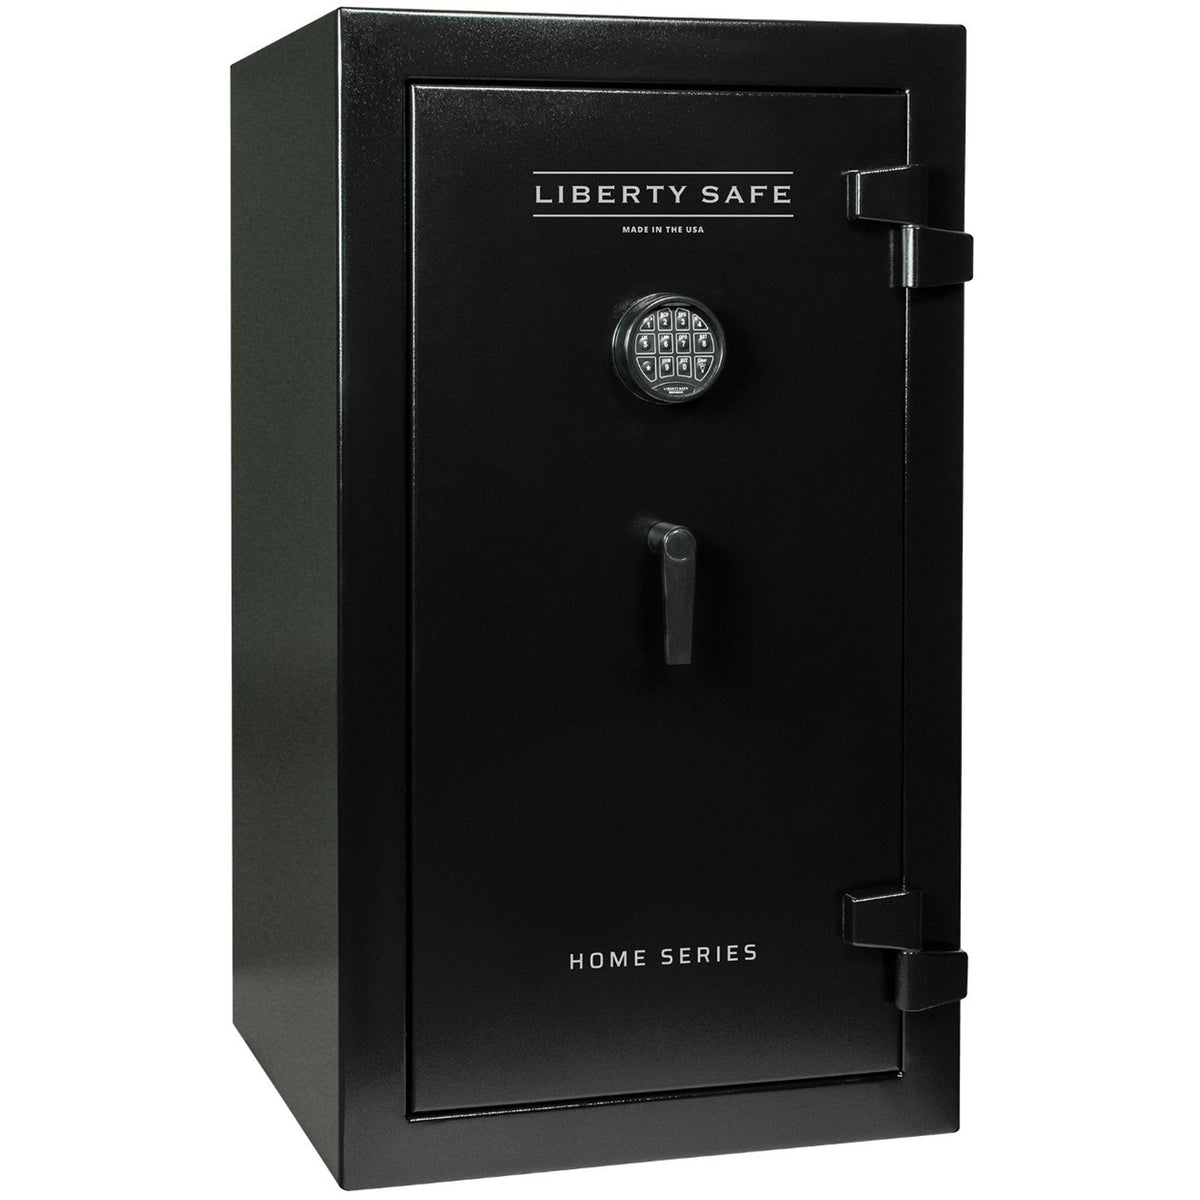 Home series | 60 minute fire protection | textured black - 12 dimensions -MODLOCK